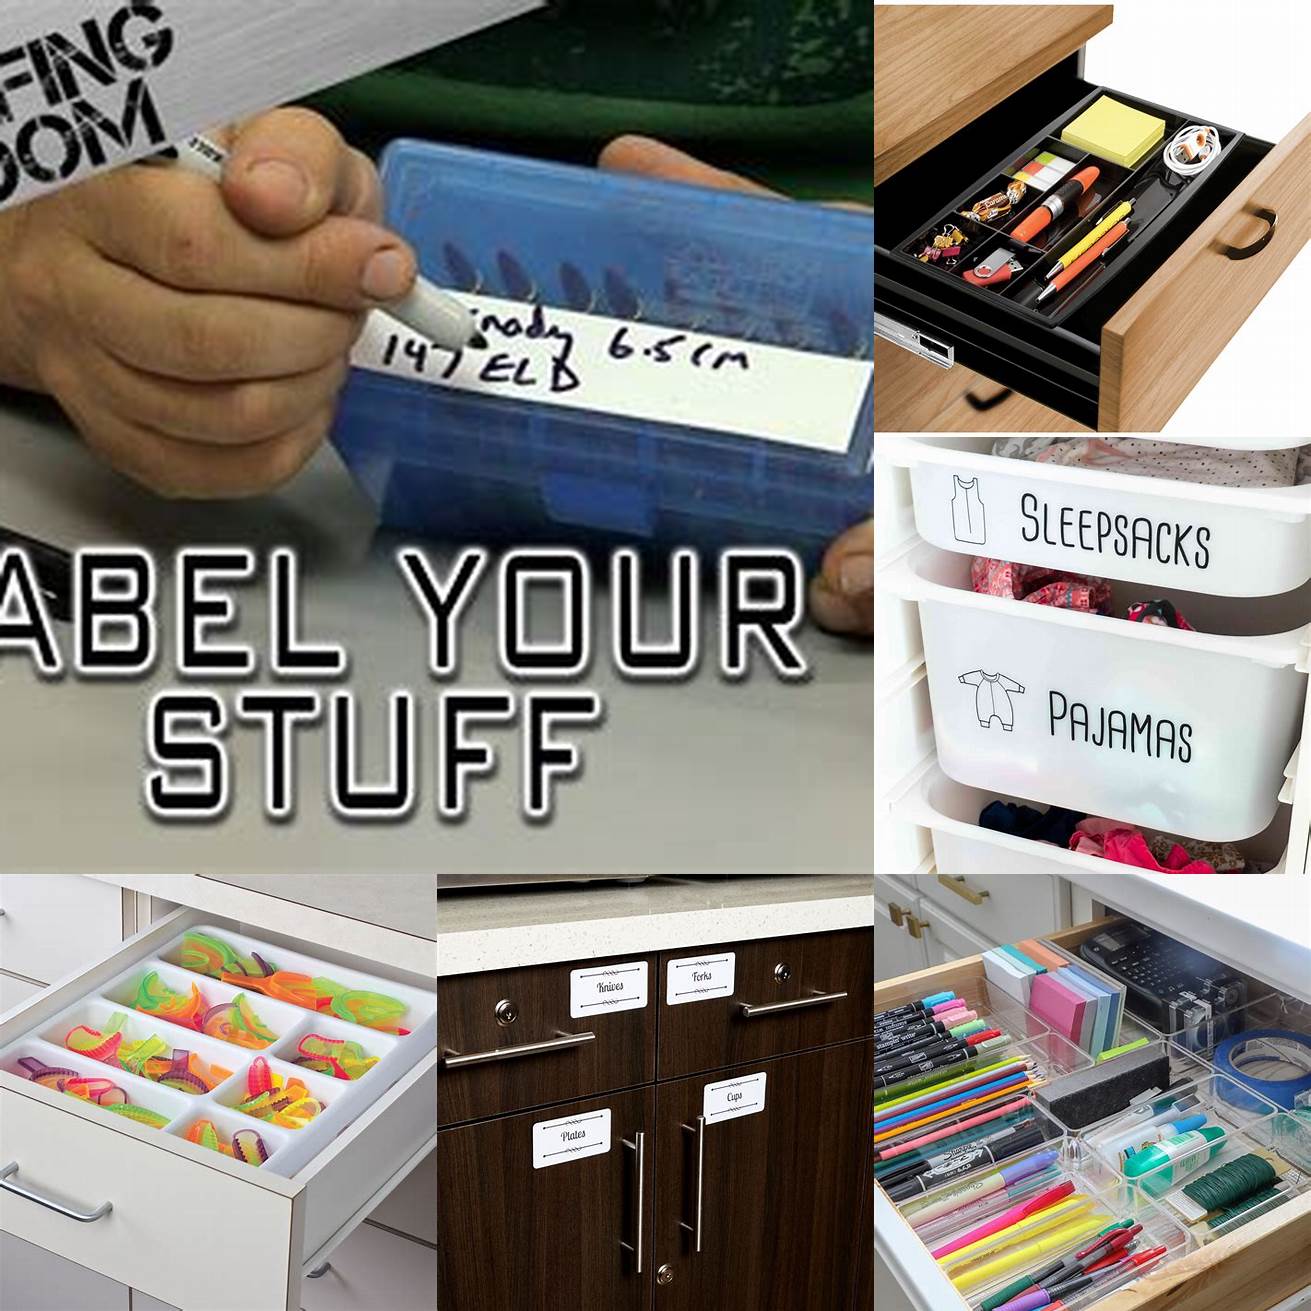 Label your items Label each drawer or compartment to help you find your items quickly and easily